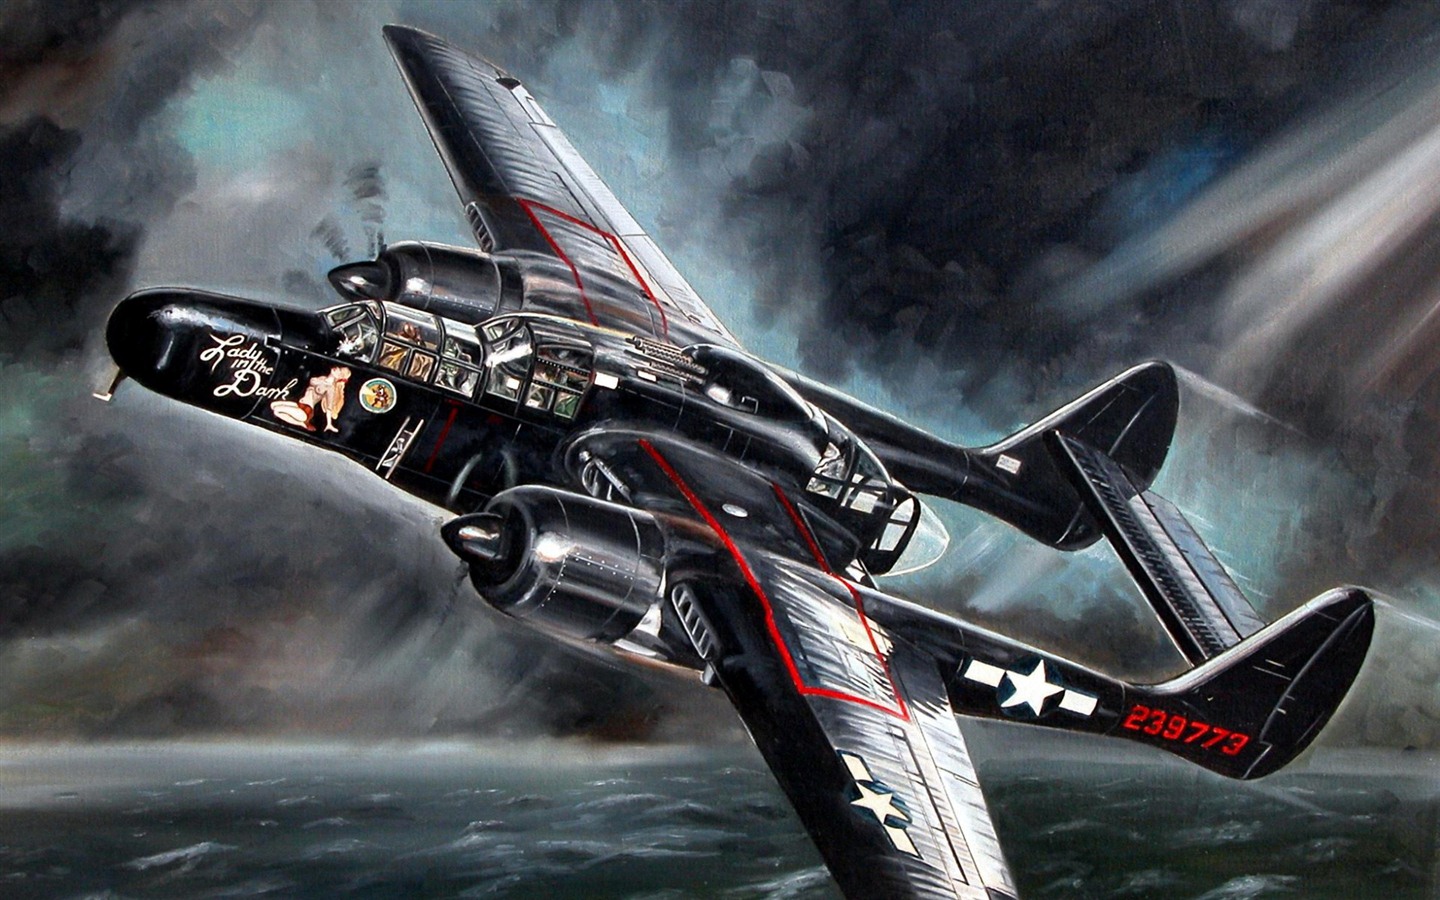 Military aircraft flight exquisite painting wallpapers #10 - 1440x900